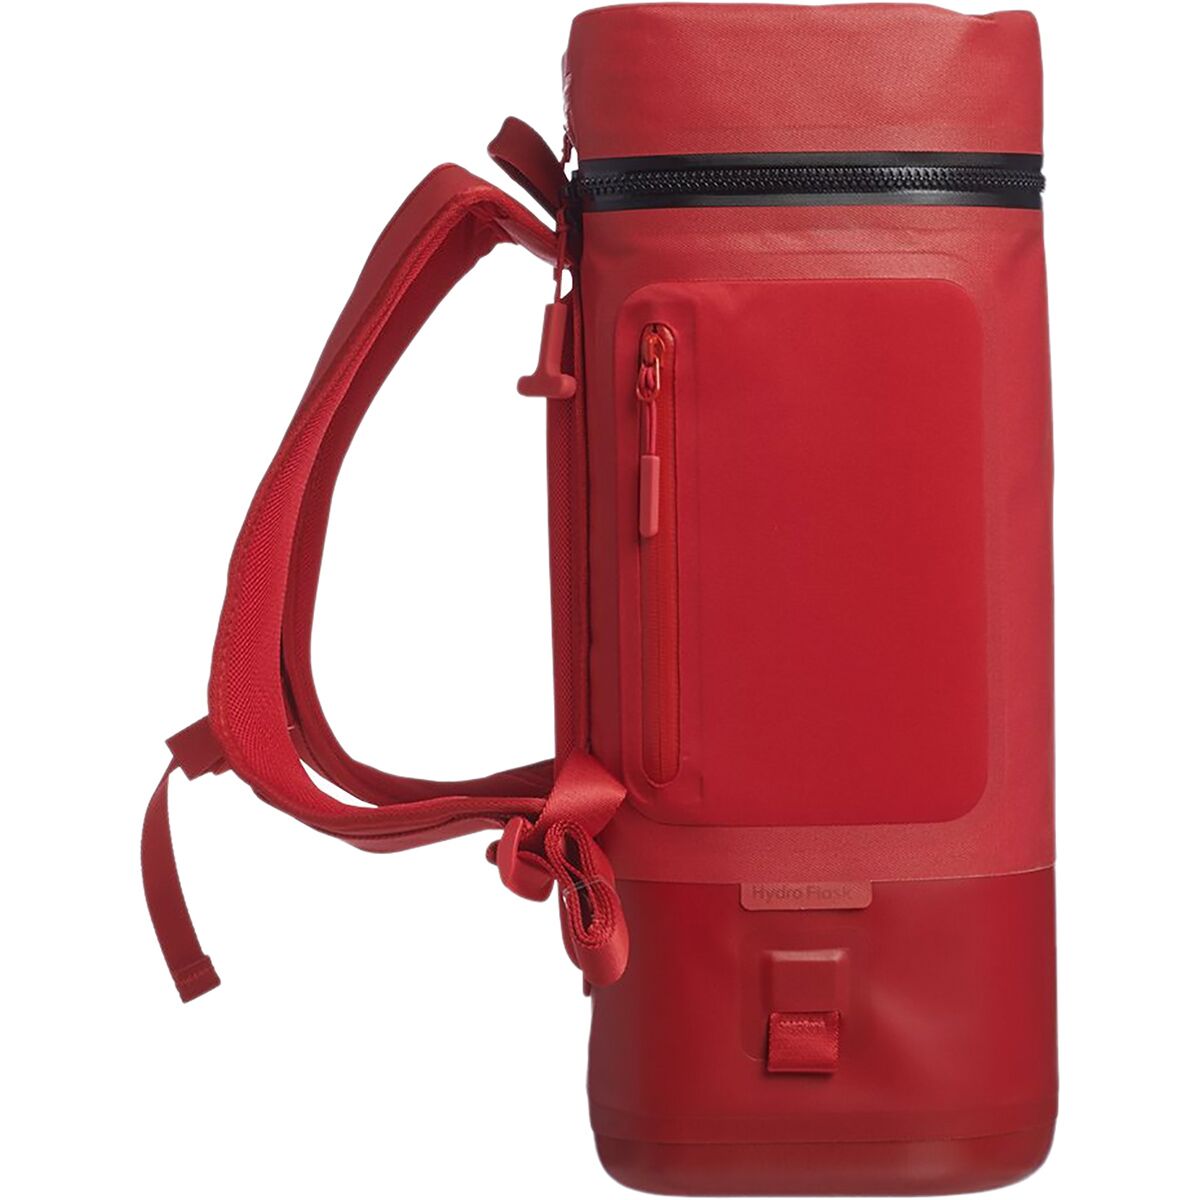 Hydro Flask Soft Cooler Pack - Dardano's Shoes